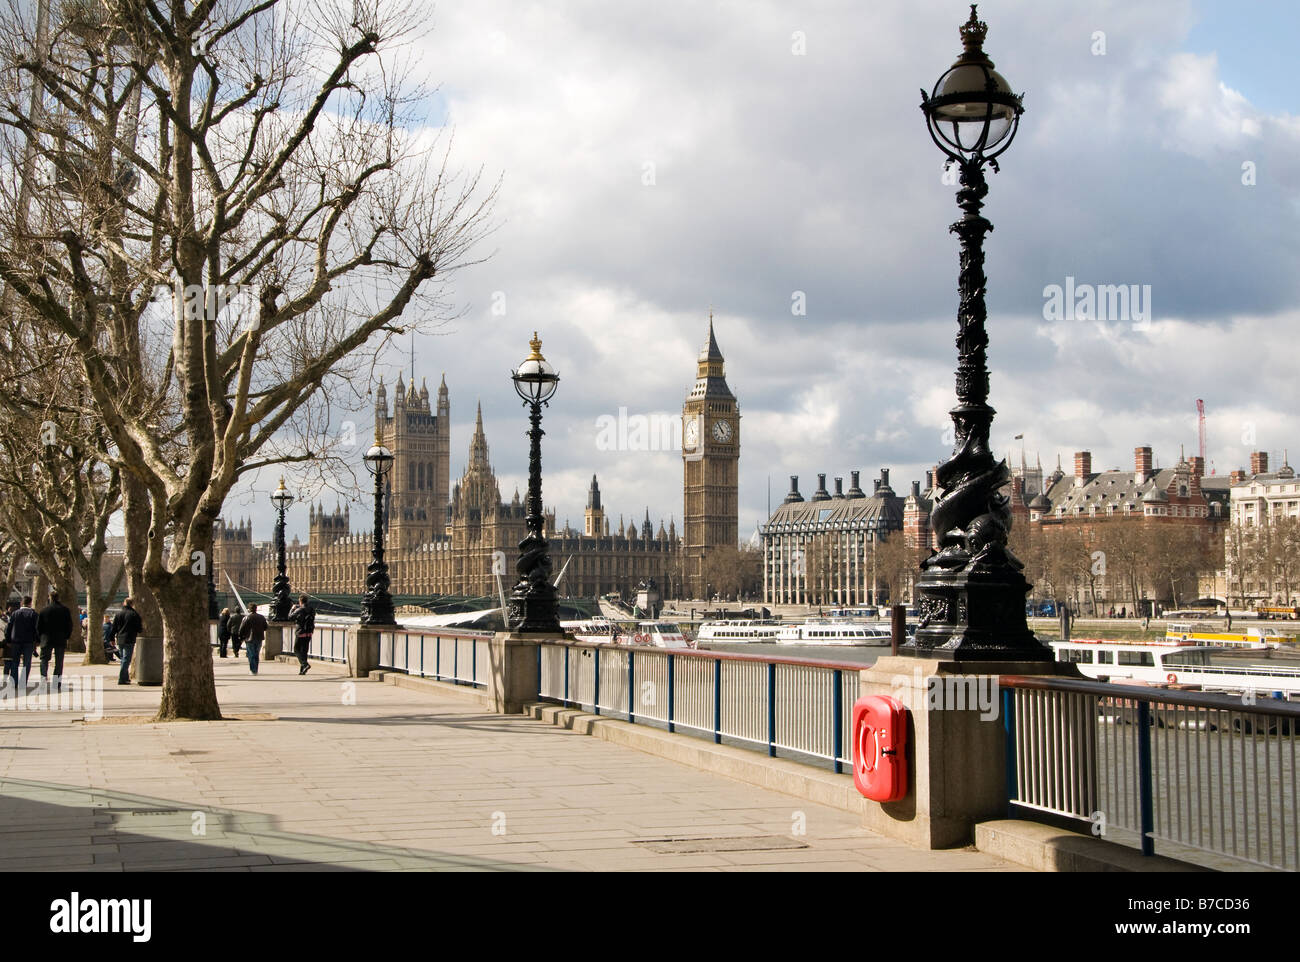 The Palace of Westminster as seen from the South Bank of the River Thames, London, UK Stock Photo